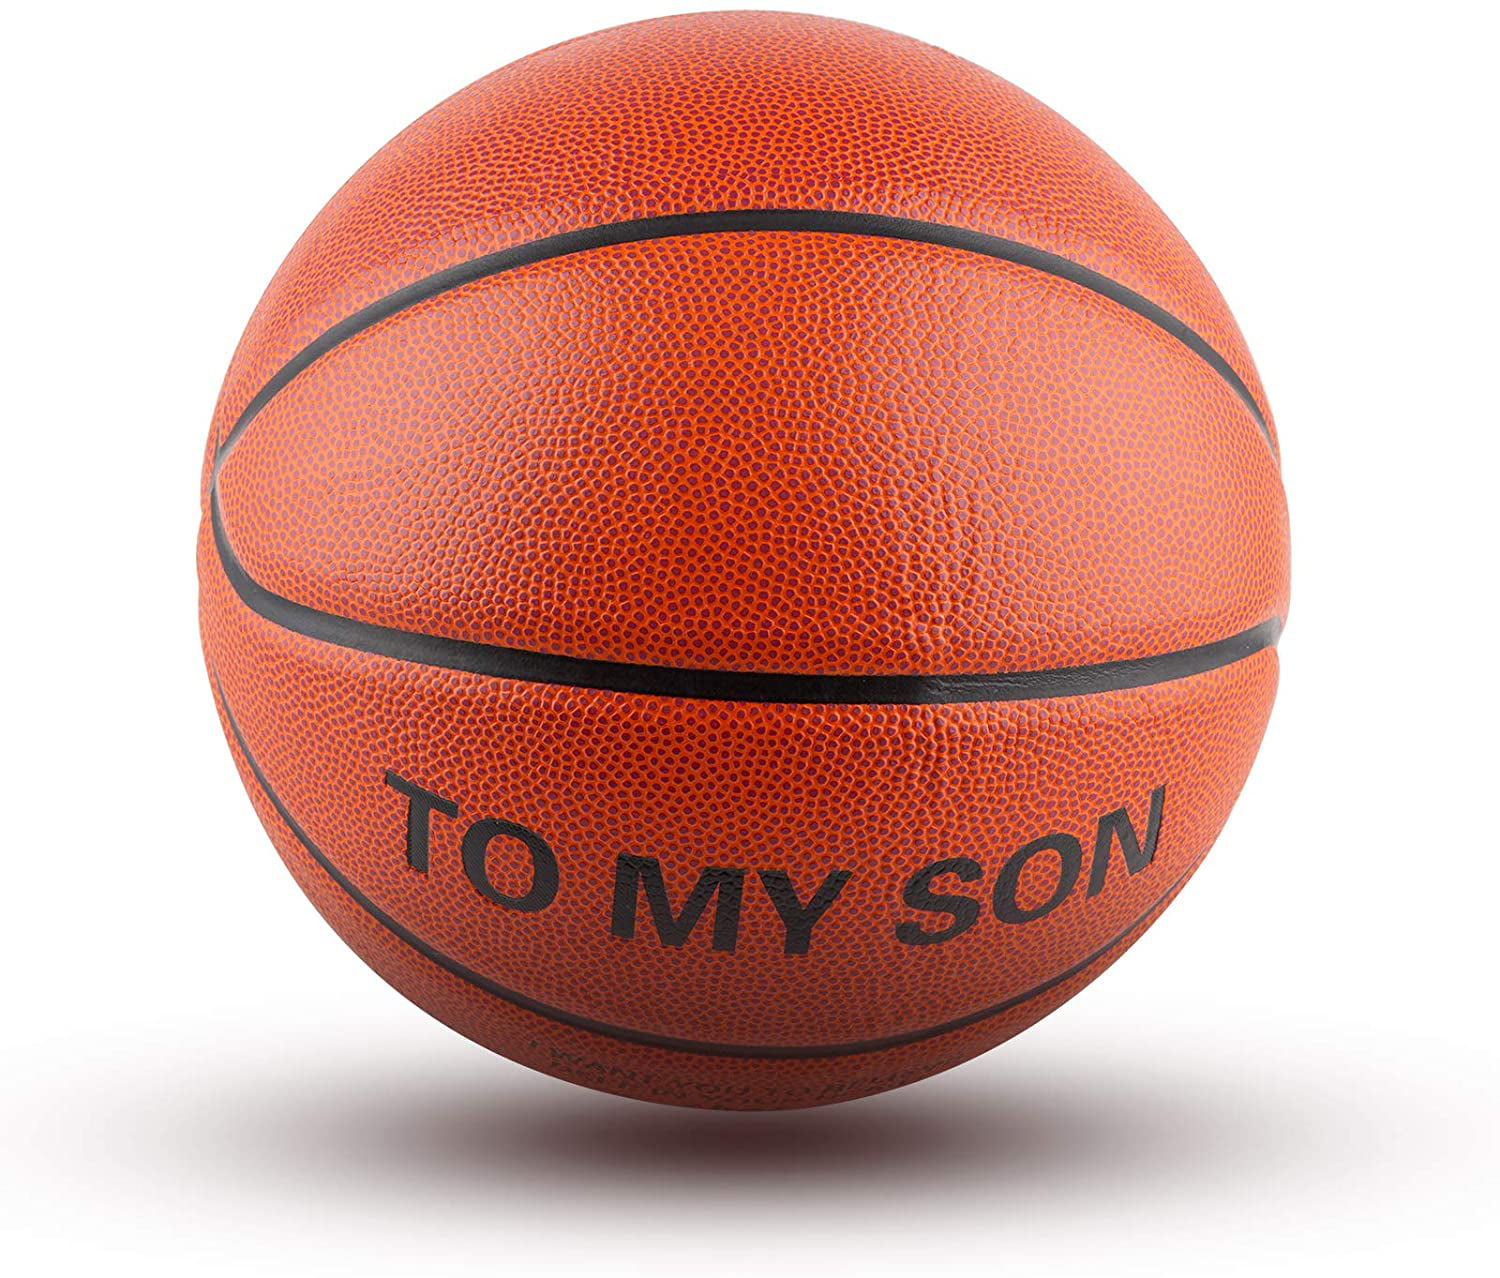 Personalized Engraving Included Champagne Glass Basketball Ball